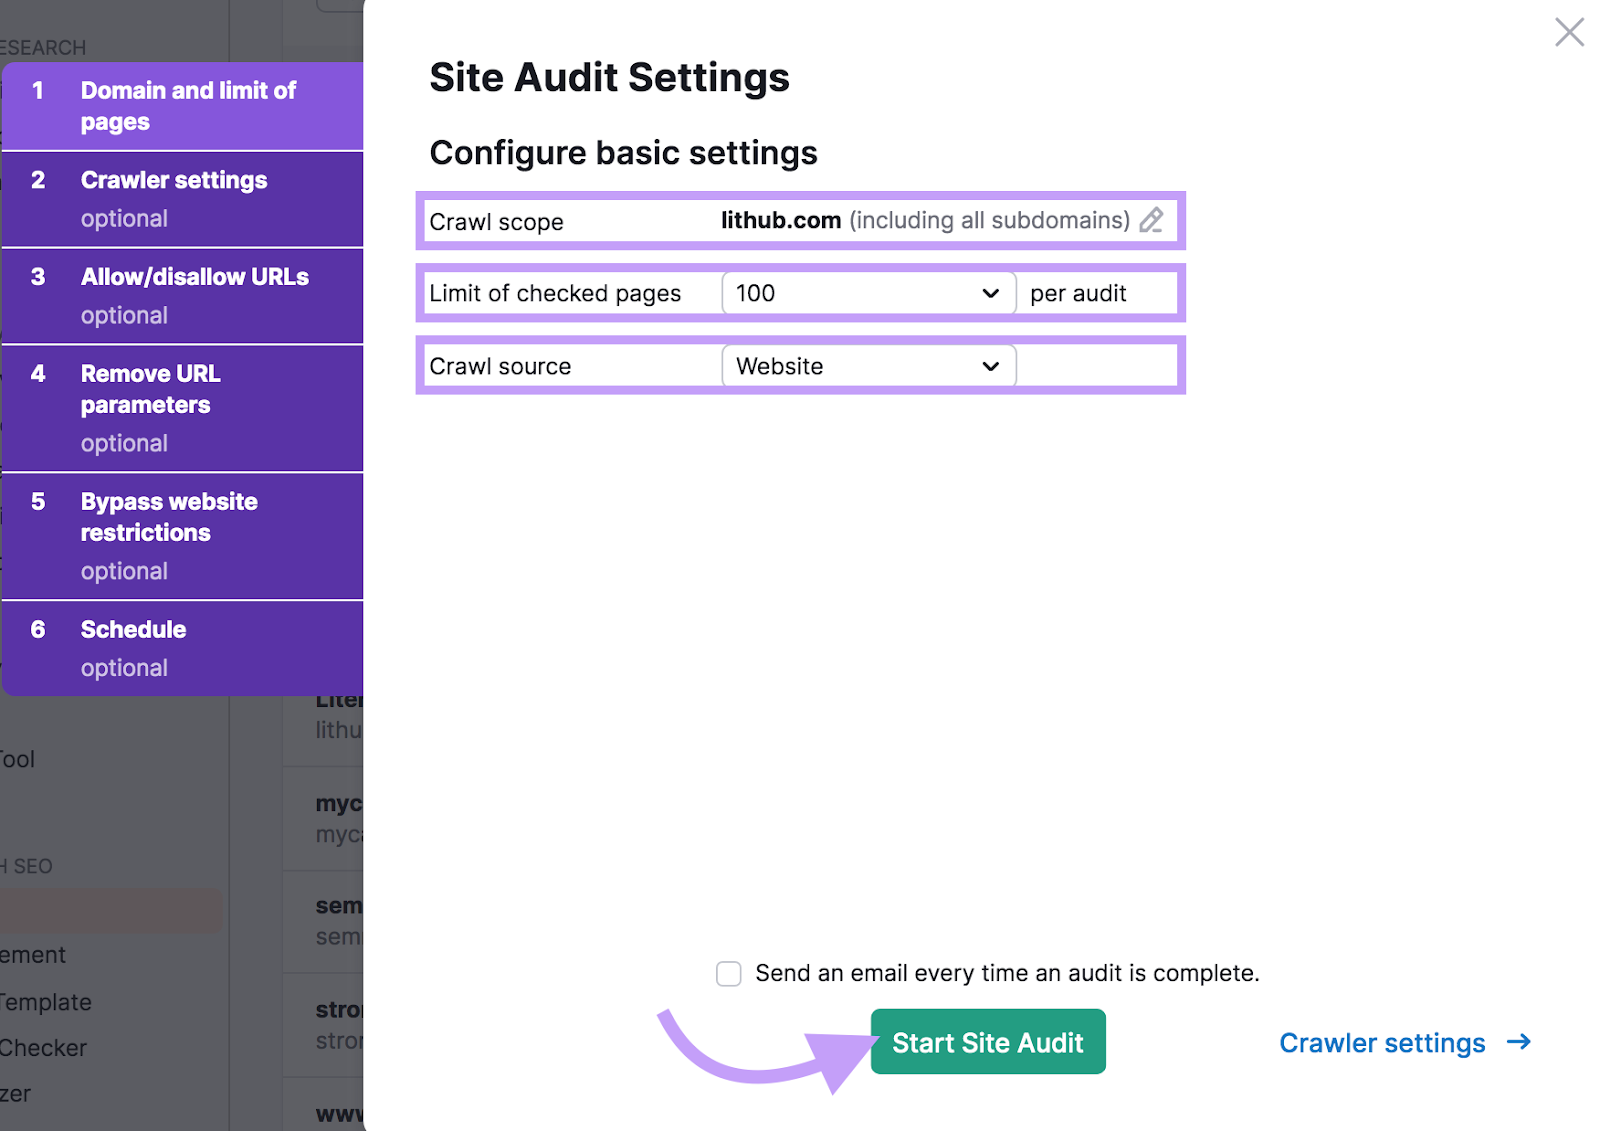 crawl scope, limit of checked pages, and crawl source configuration settings in Site Audit tool